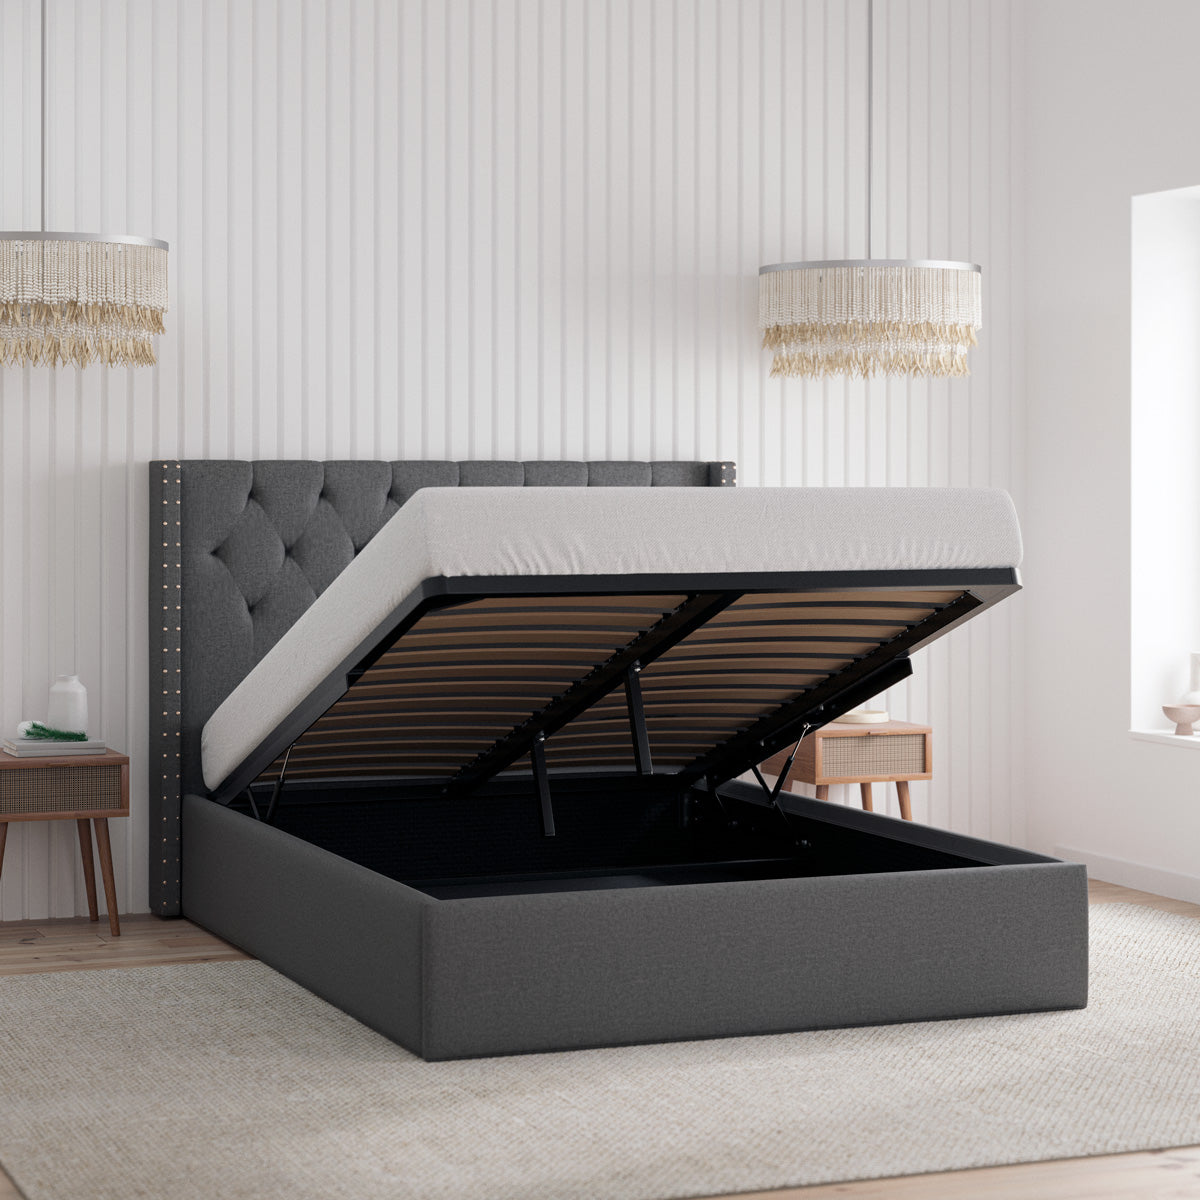 Leonora Gas Lift Storage Wing Bed Frame with Studs (Charcoal Fabric)